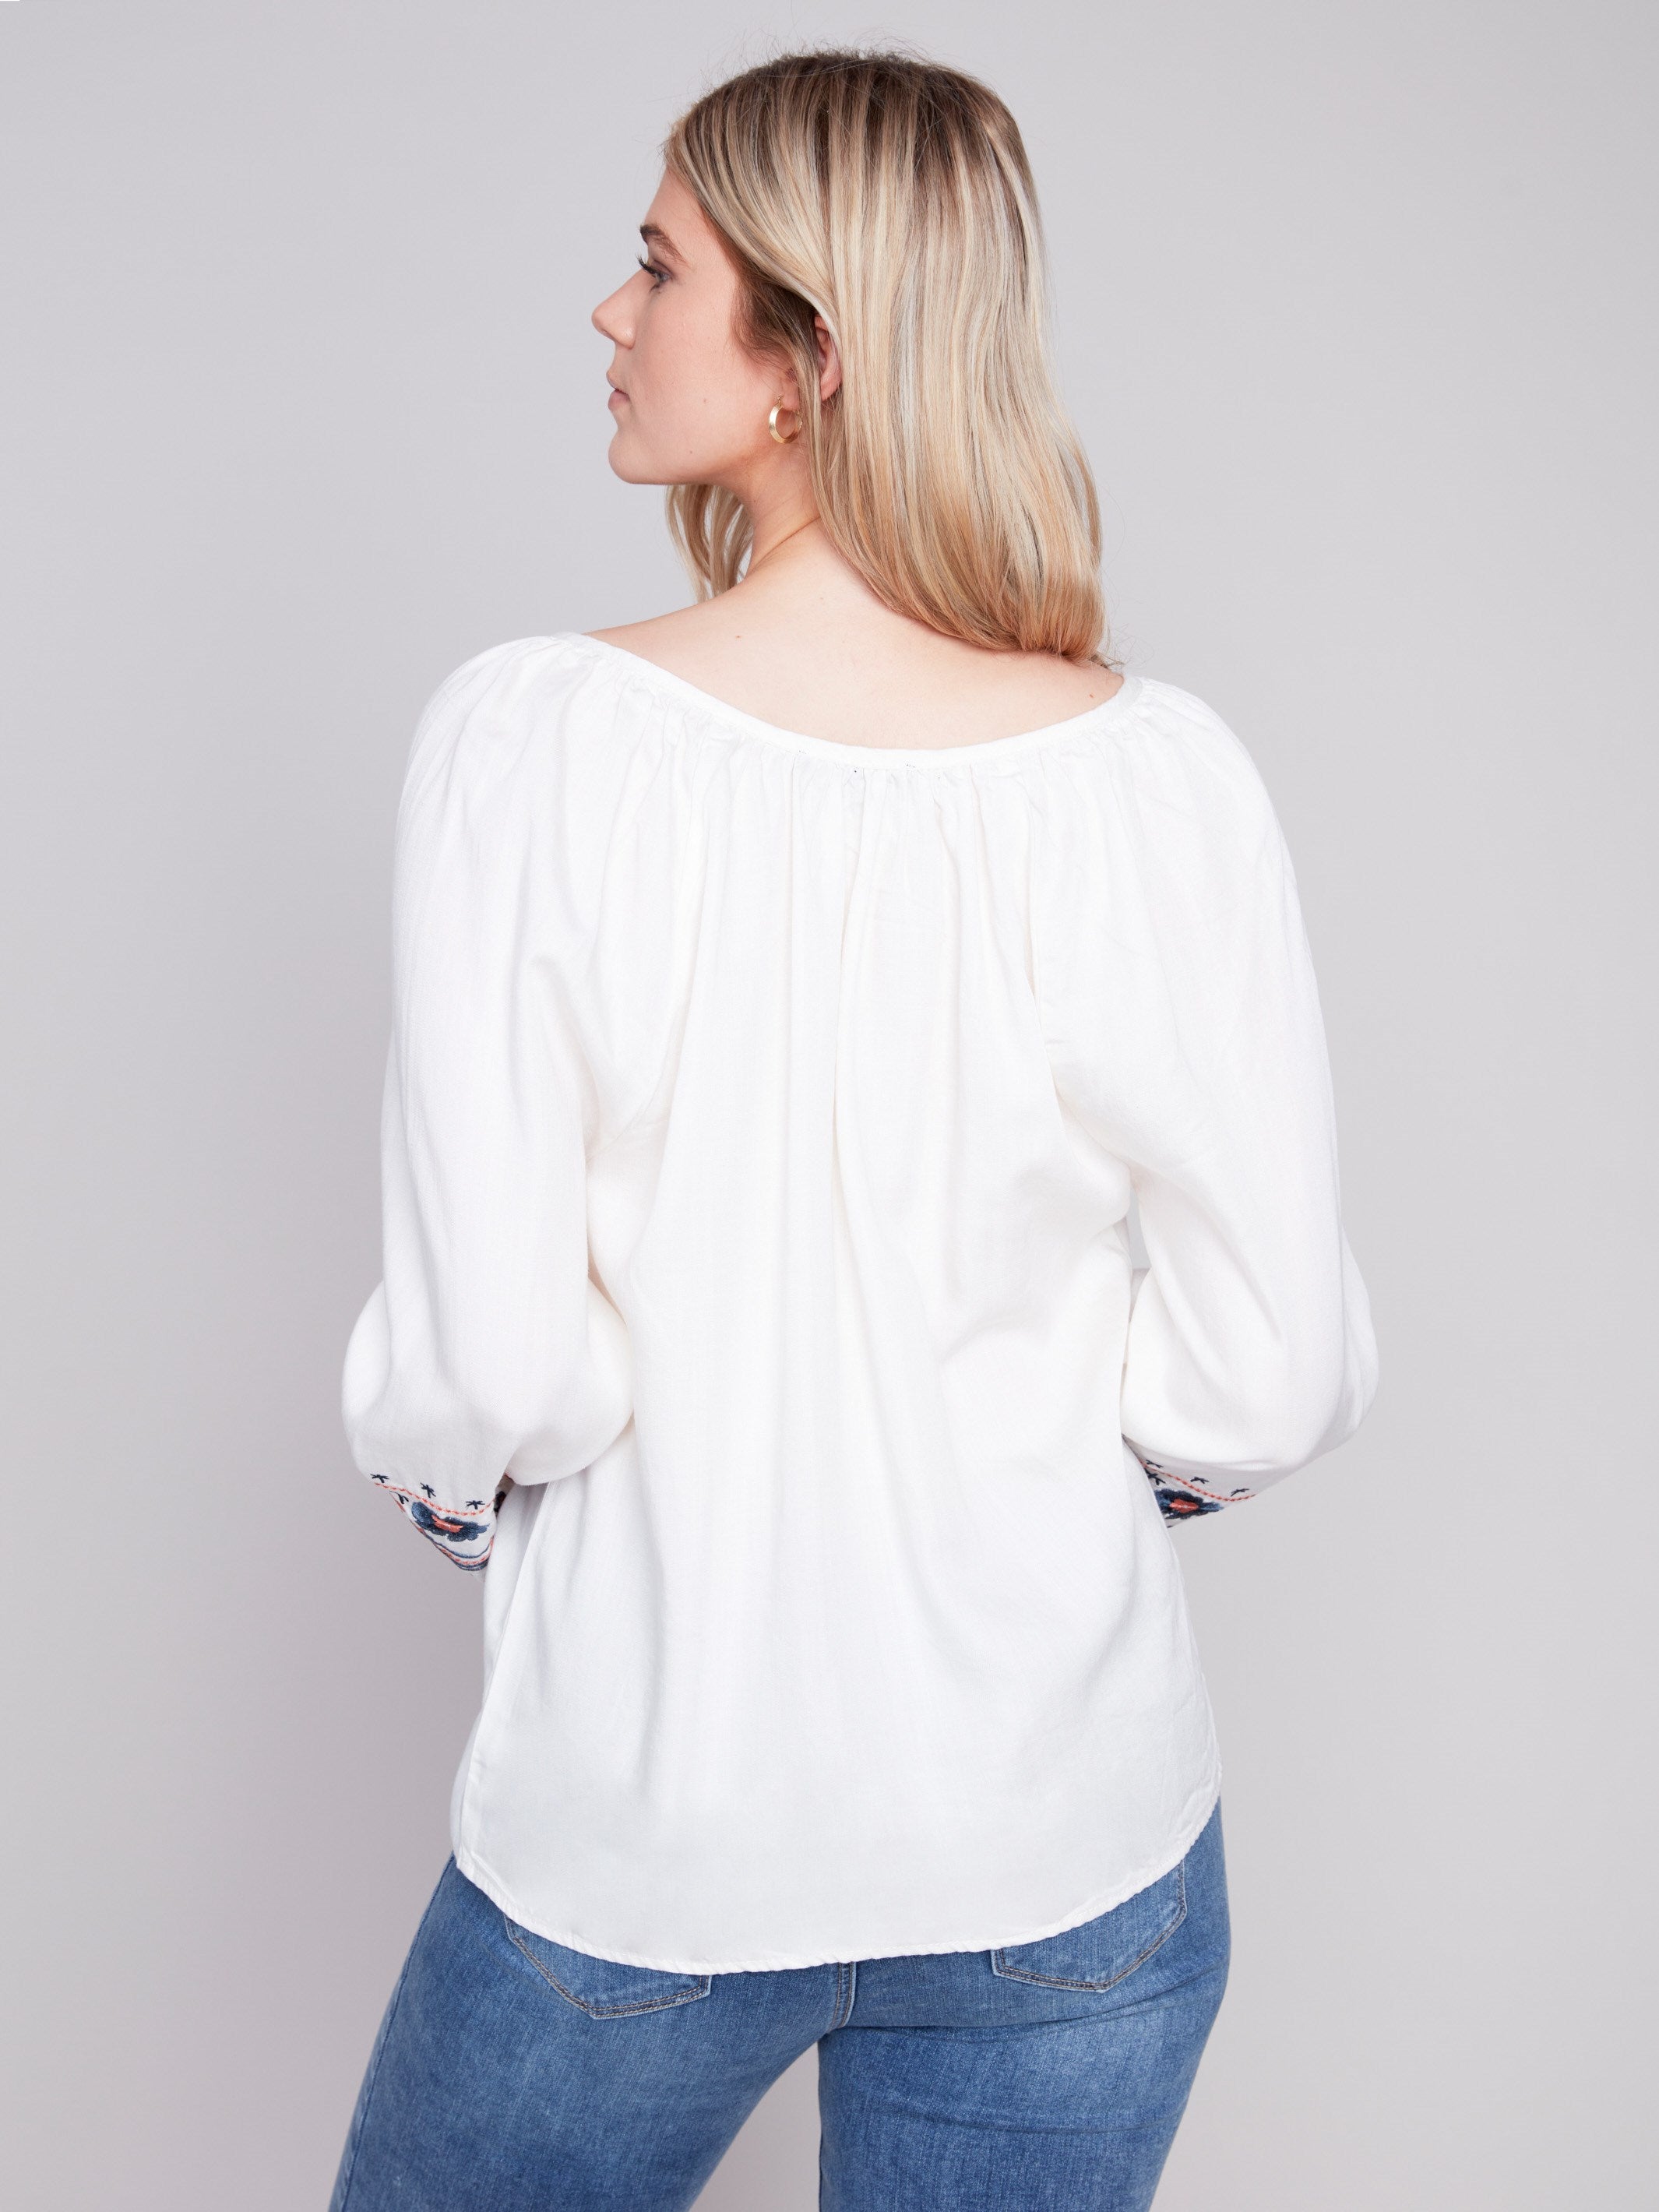 Charlie B Embroidered Tencel Blouse - White - Image 2